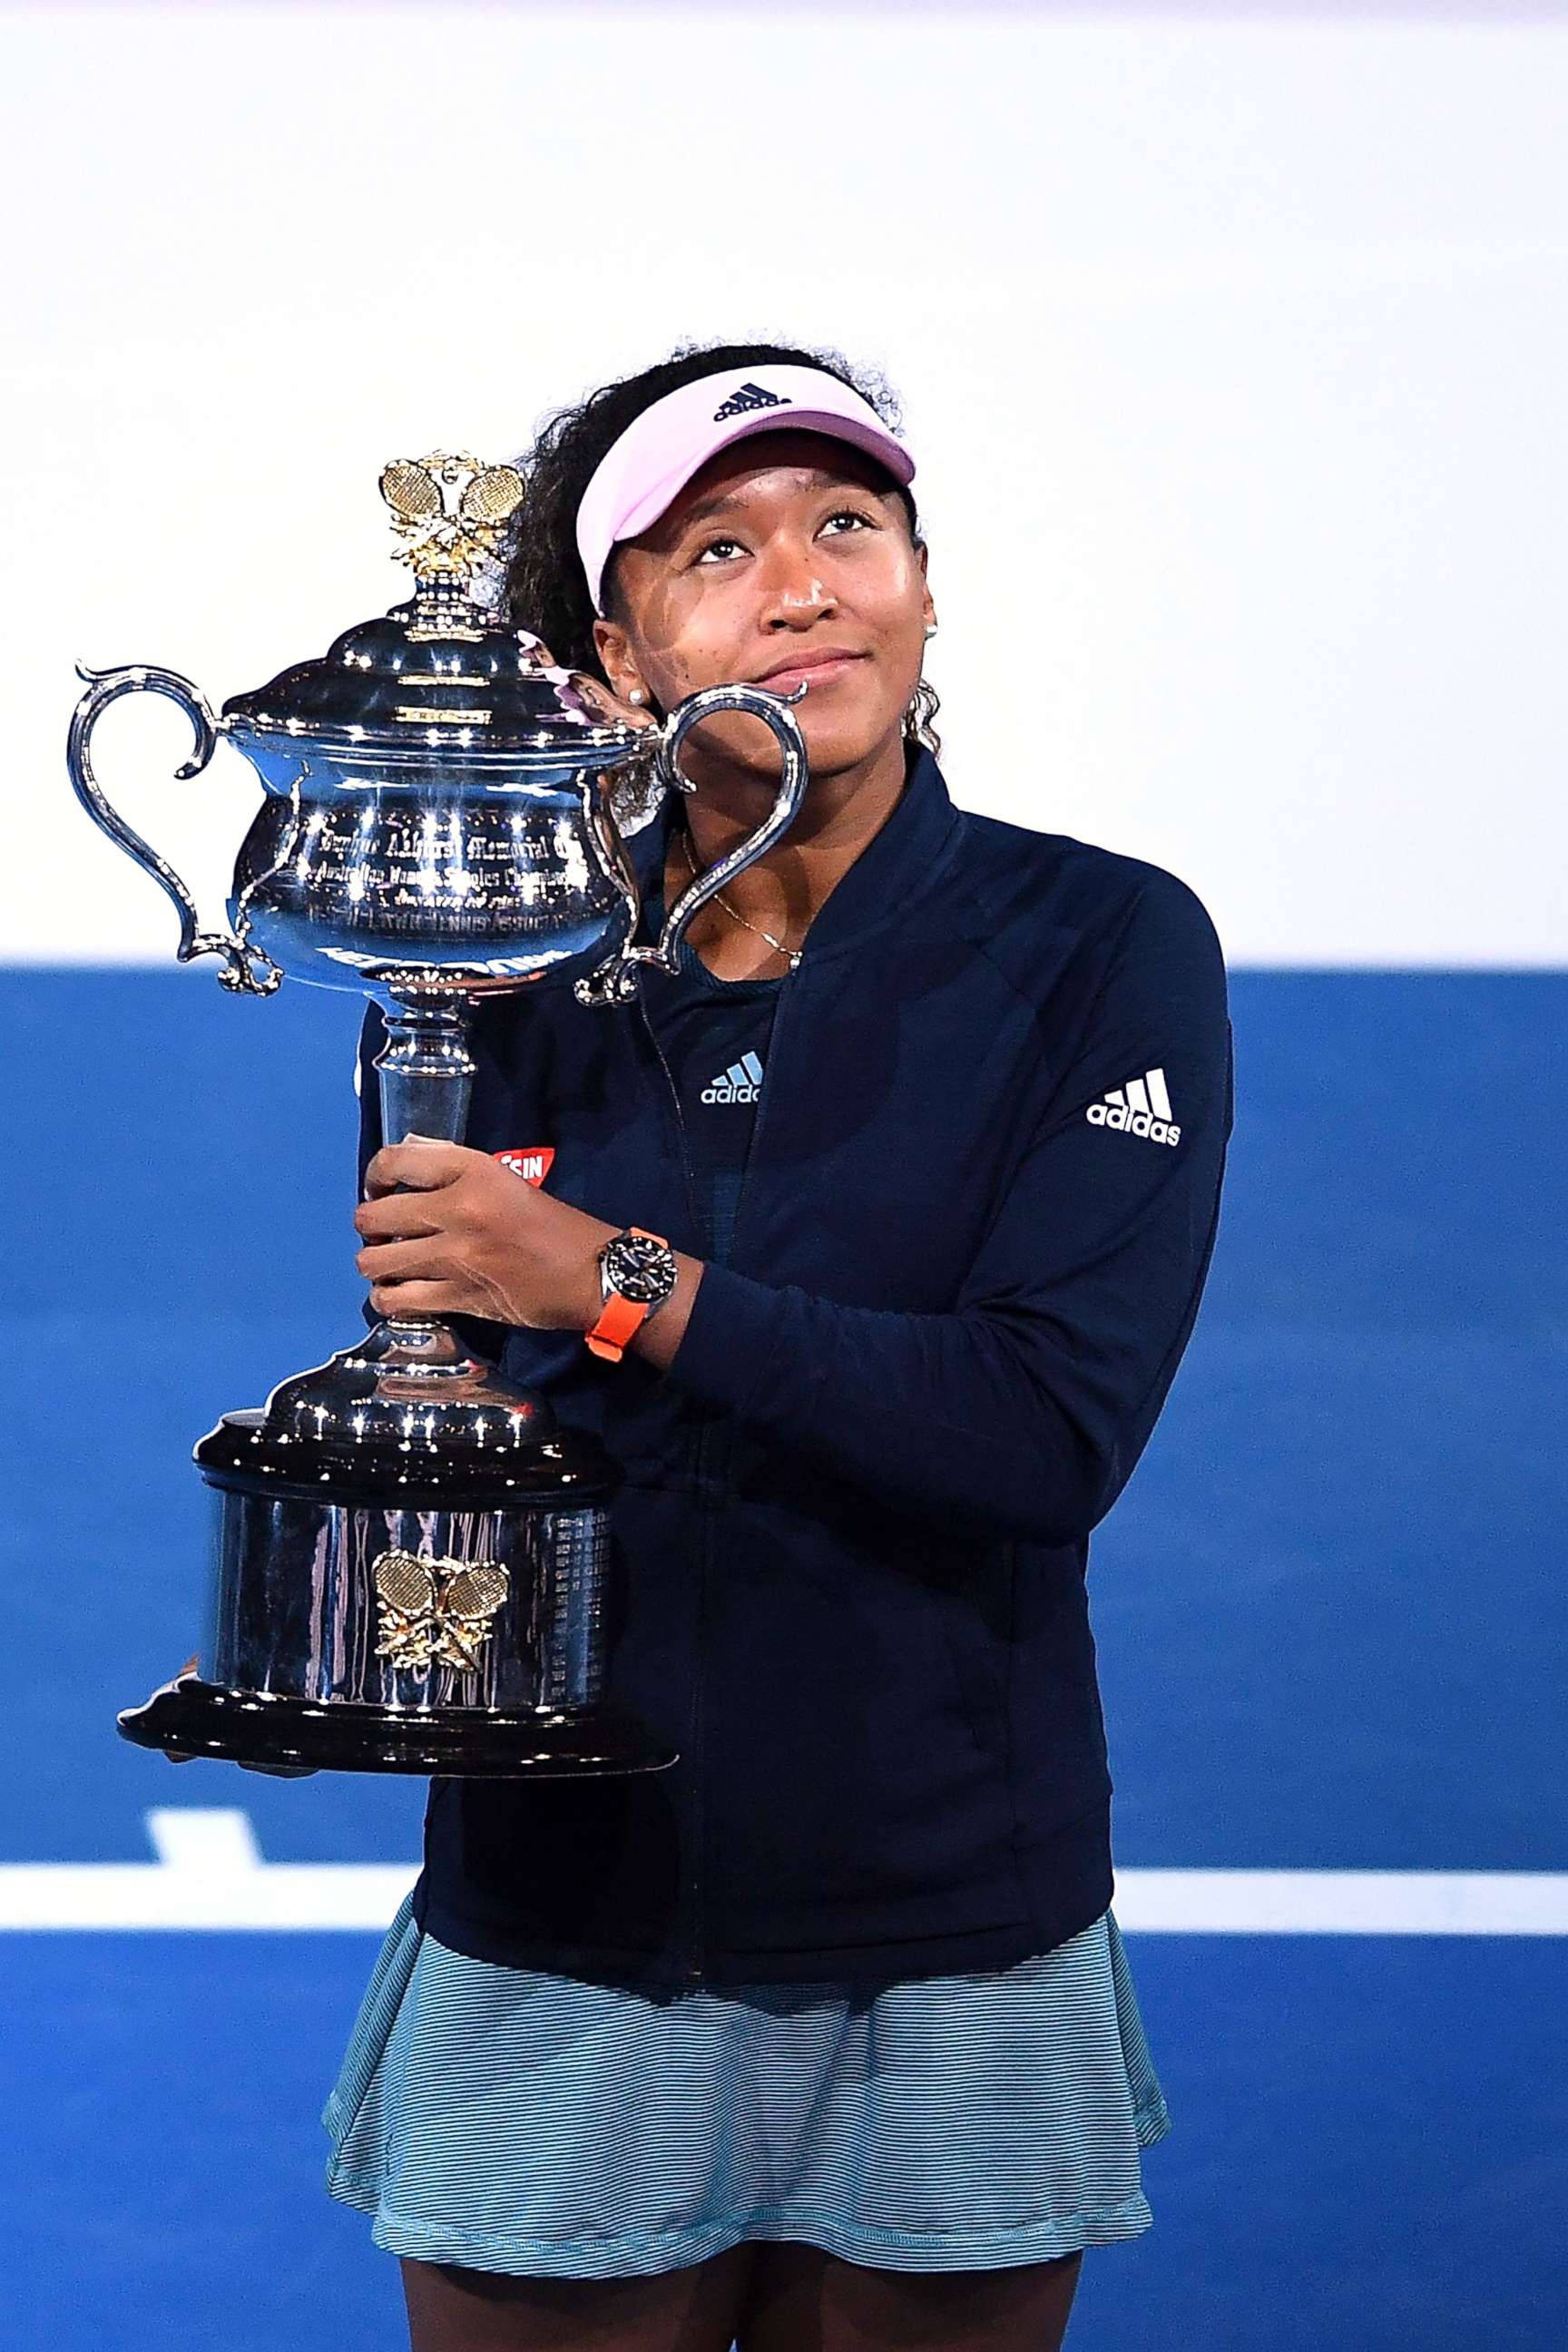 PHOTO: Naomi Osaka of Japan reacts during the presentation of the winner's trophy after defeating Petra Kvitova of the Czech Republic in the women's singles final at the Australian Open Grand Slam tennis tournament in Melbourne, Australia, Jan. 26, 2019.